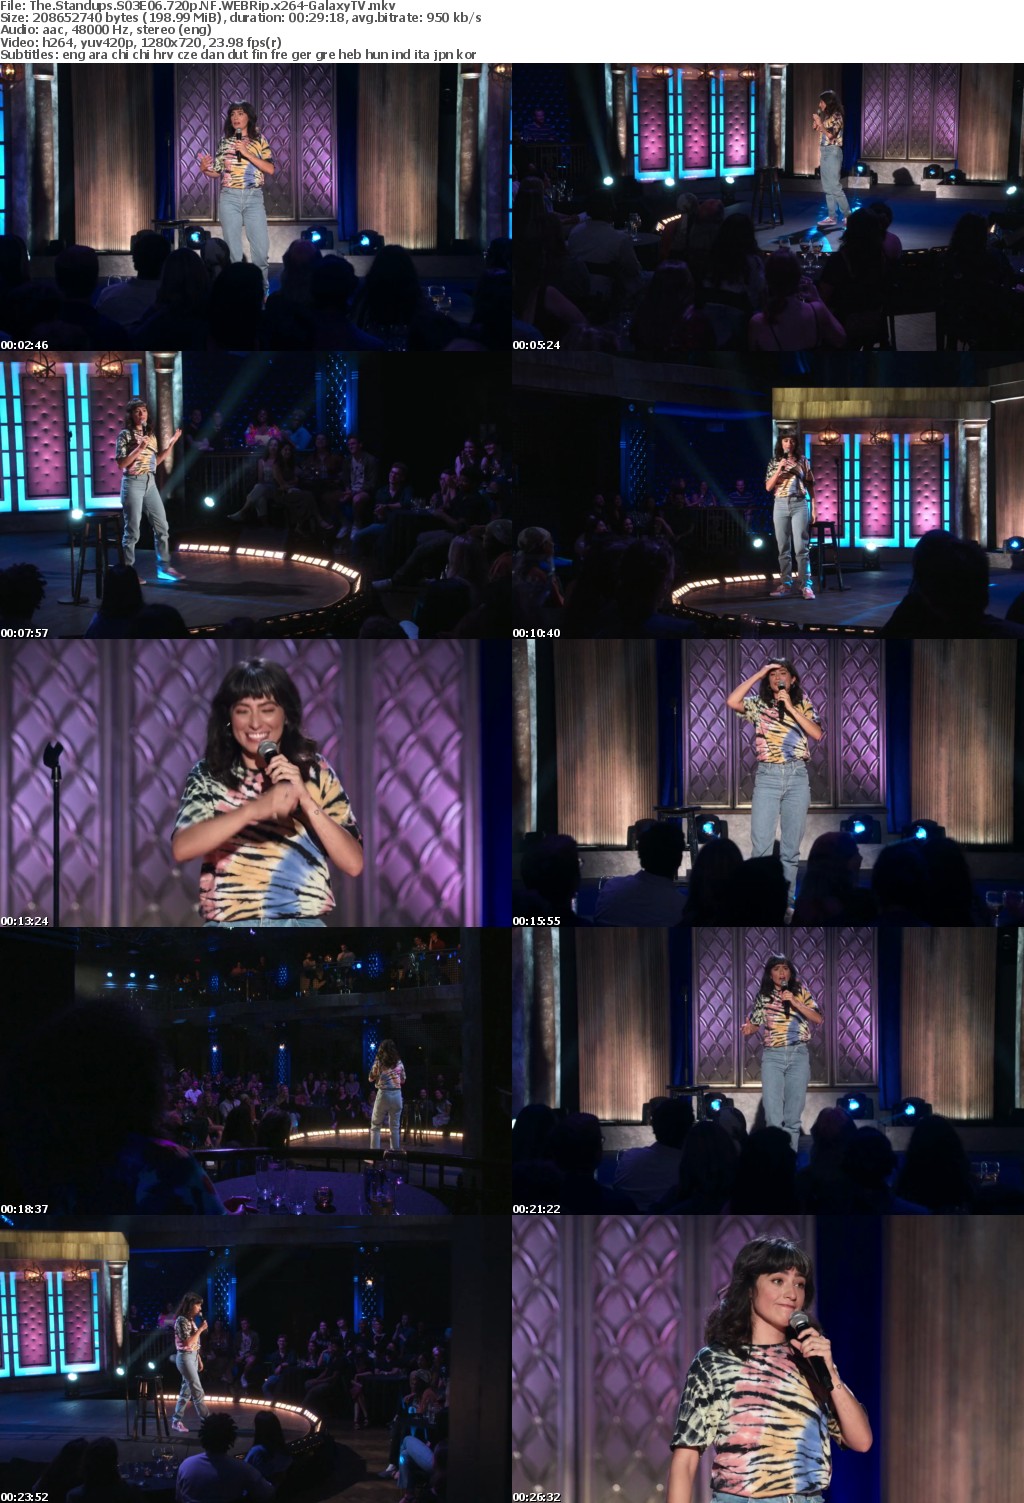 The Standups S03 COMPLETE 720p NF WEBRip x264-GalaxyTV